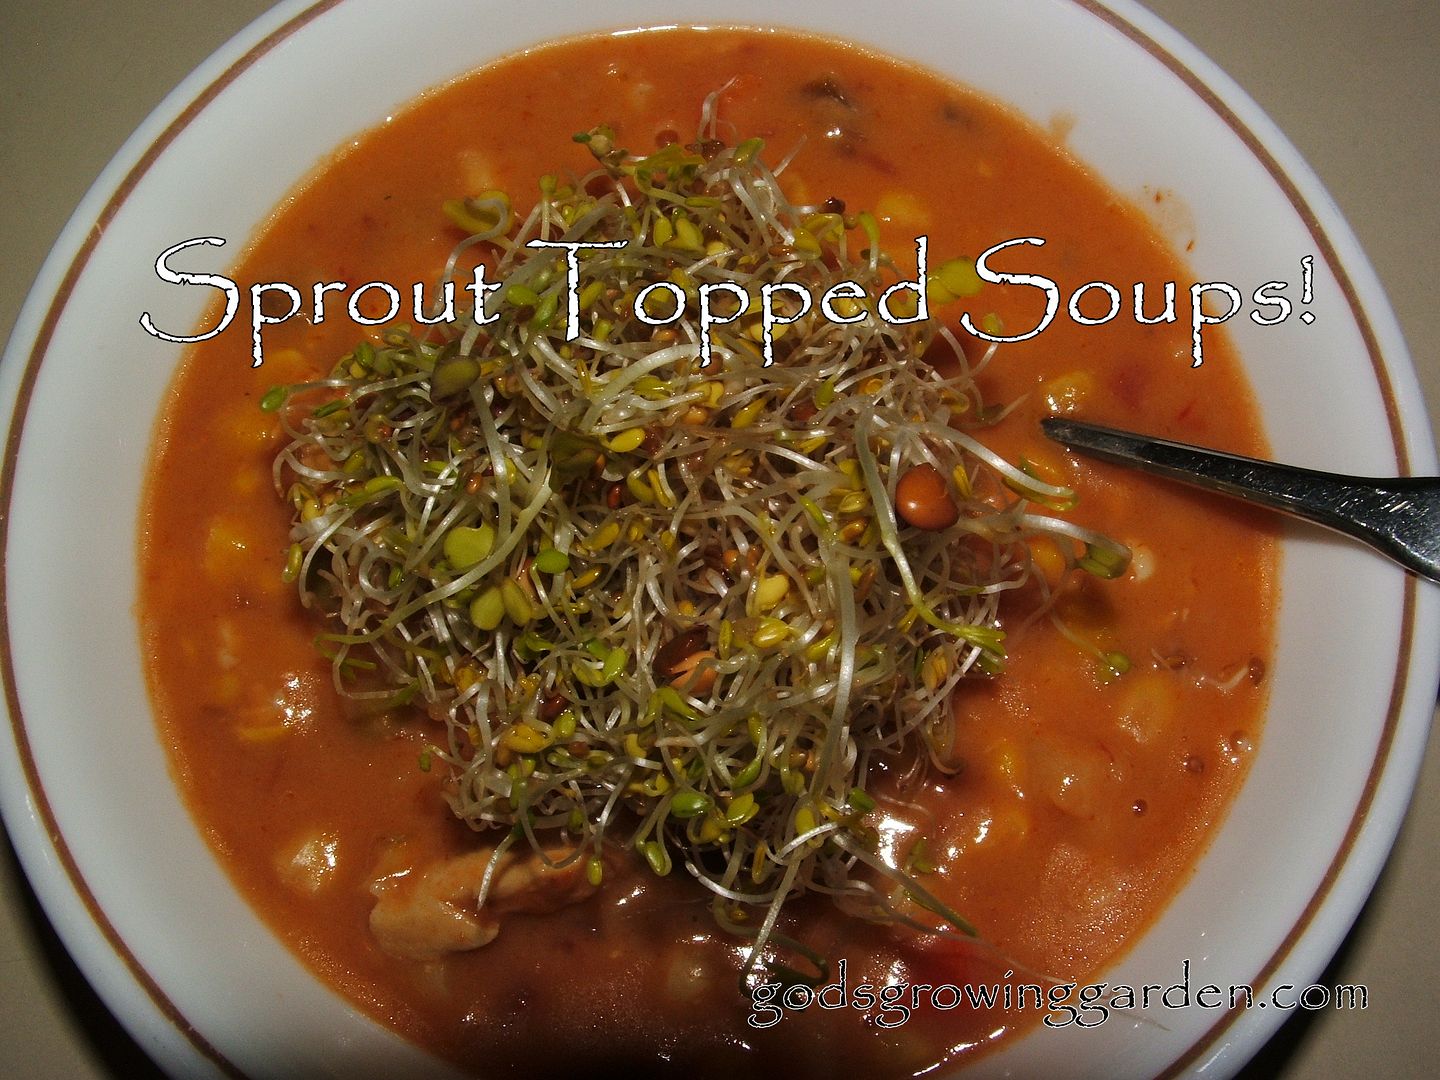 Sprout topped soups by Angie Ouellette-Tower for godsgrowinggarden.com photo 005_zps35fd9c0e.jpg